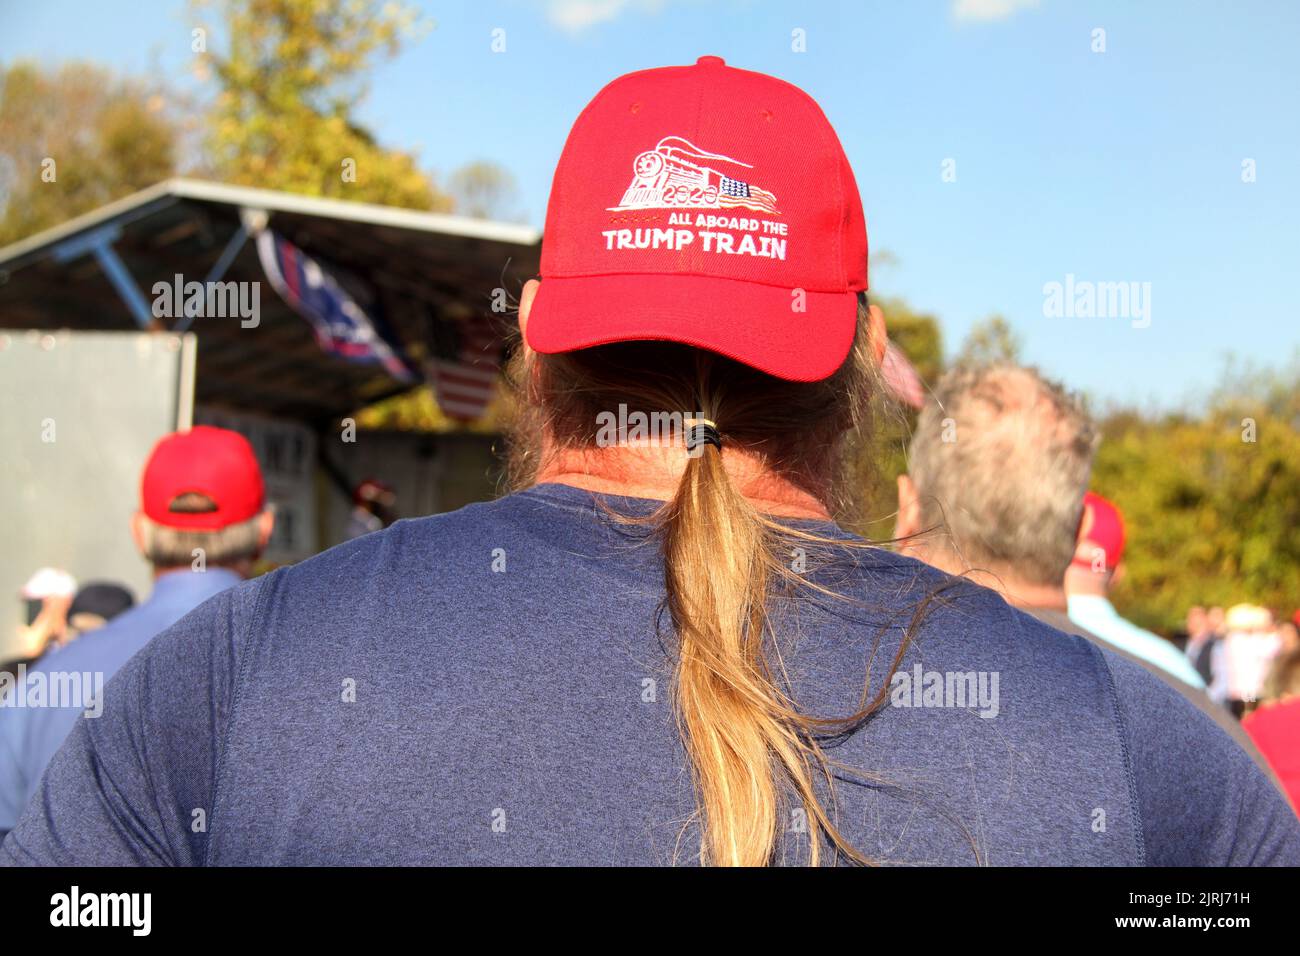 Trump supporter's hat during the presidential campaign in the U.S.A. 2020 Stock Photo